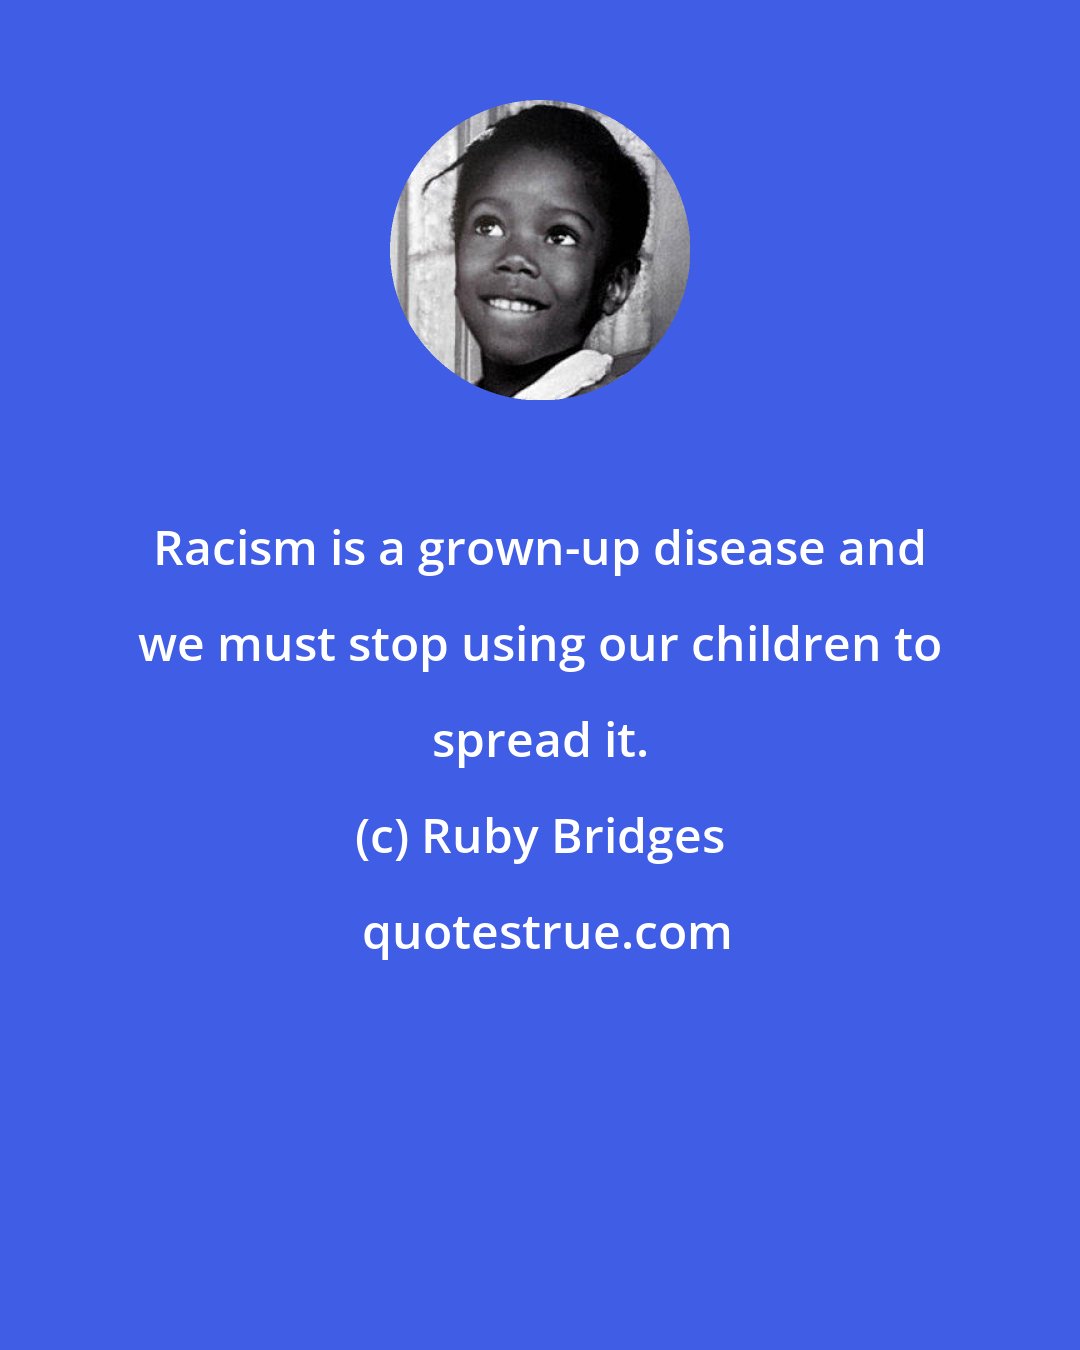 Ruby Bridges: Racism is a grown-up disease and we must stop using our children to spread it.